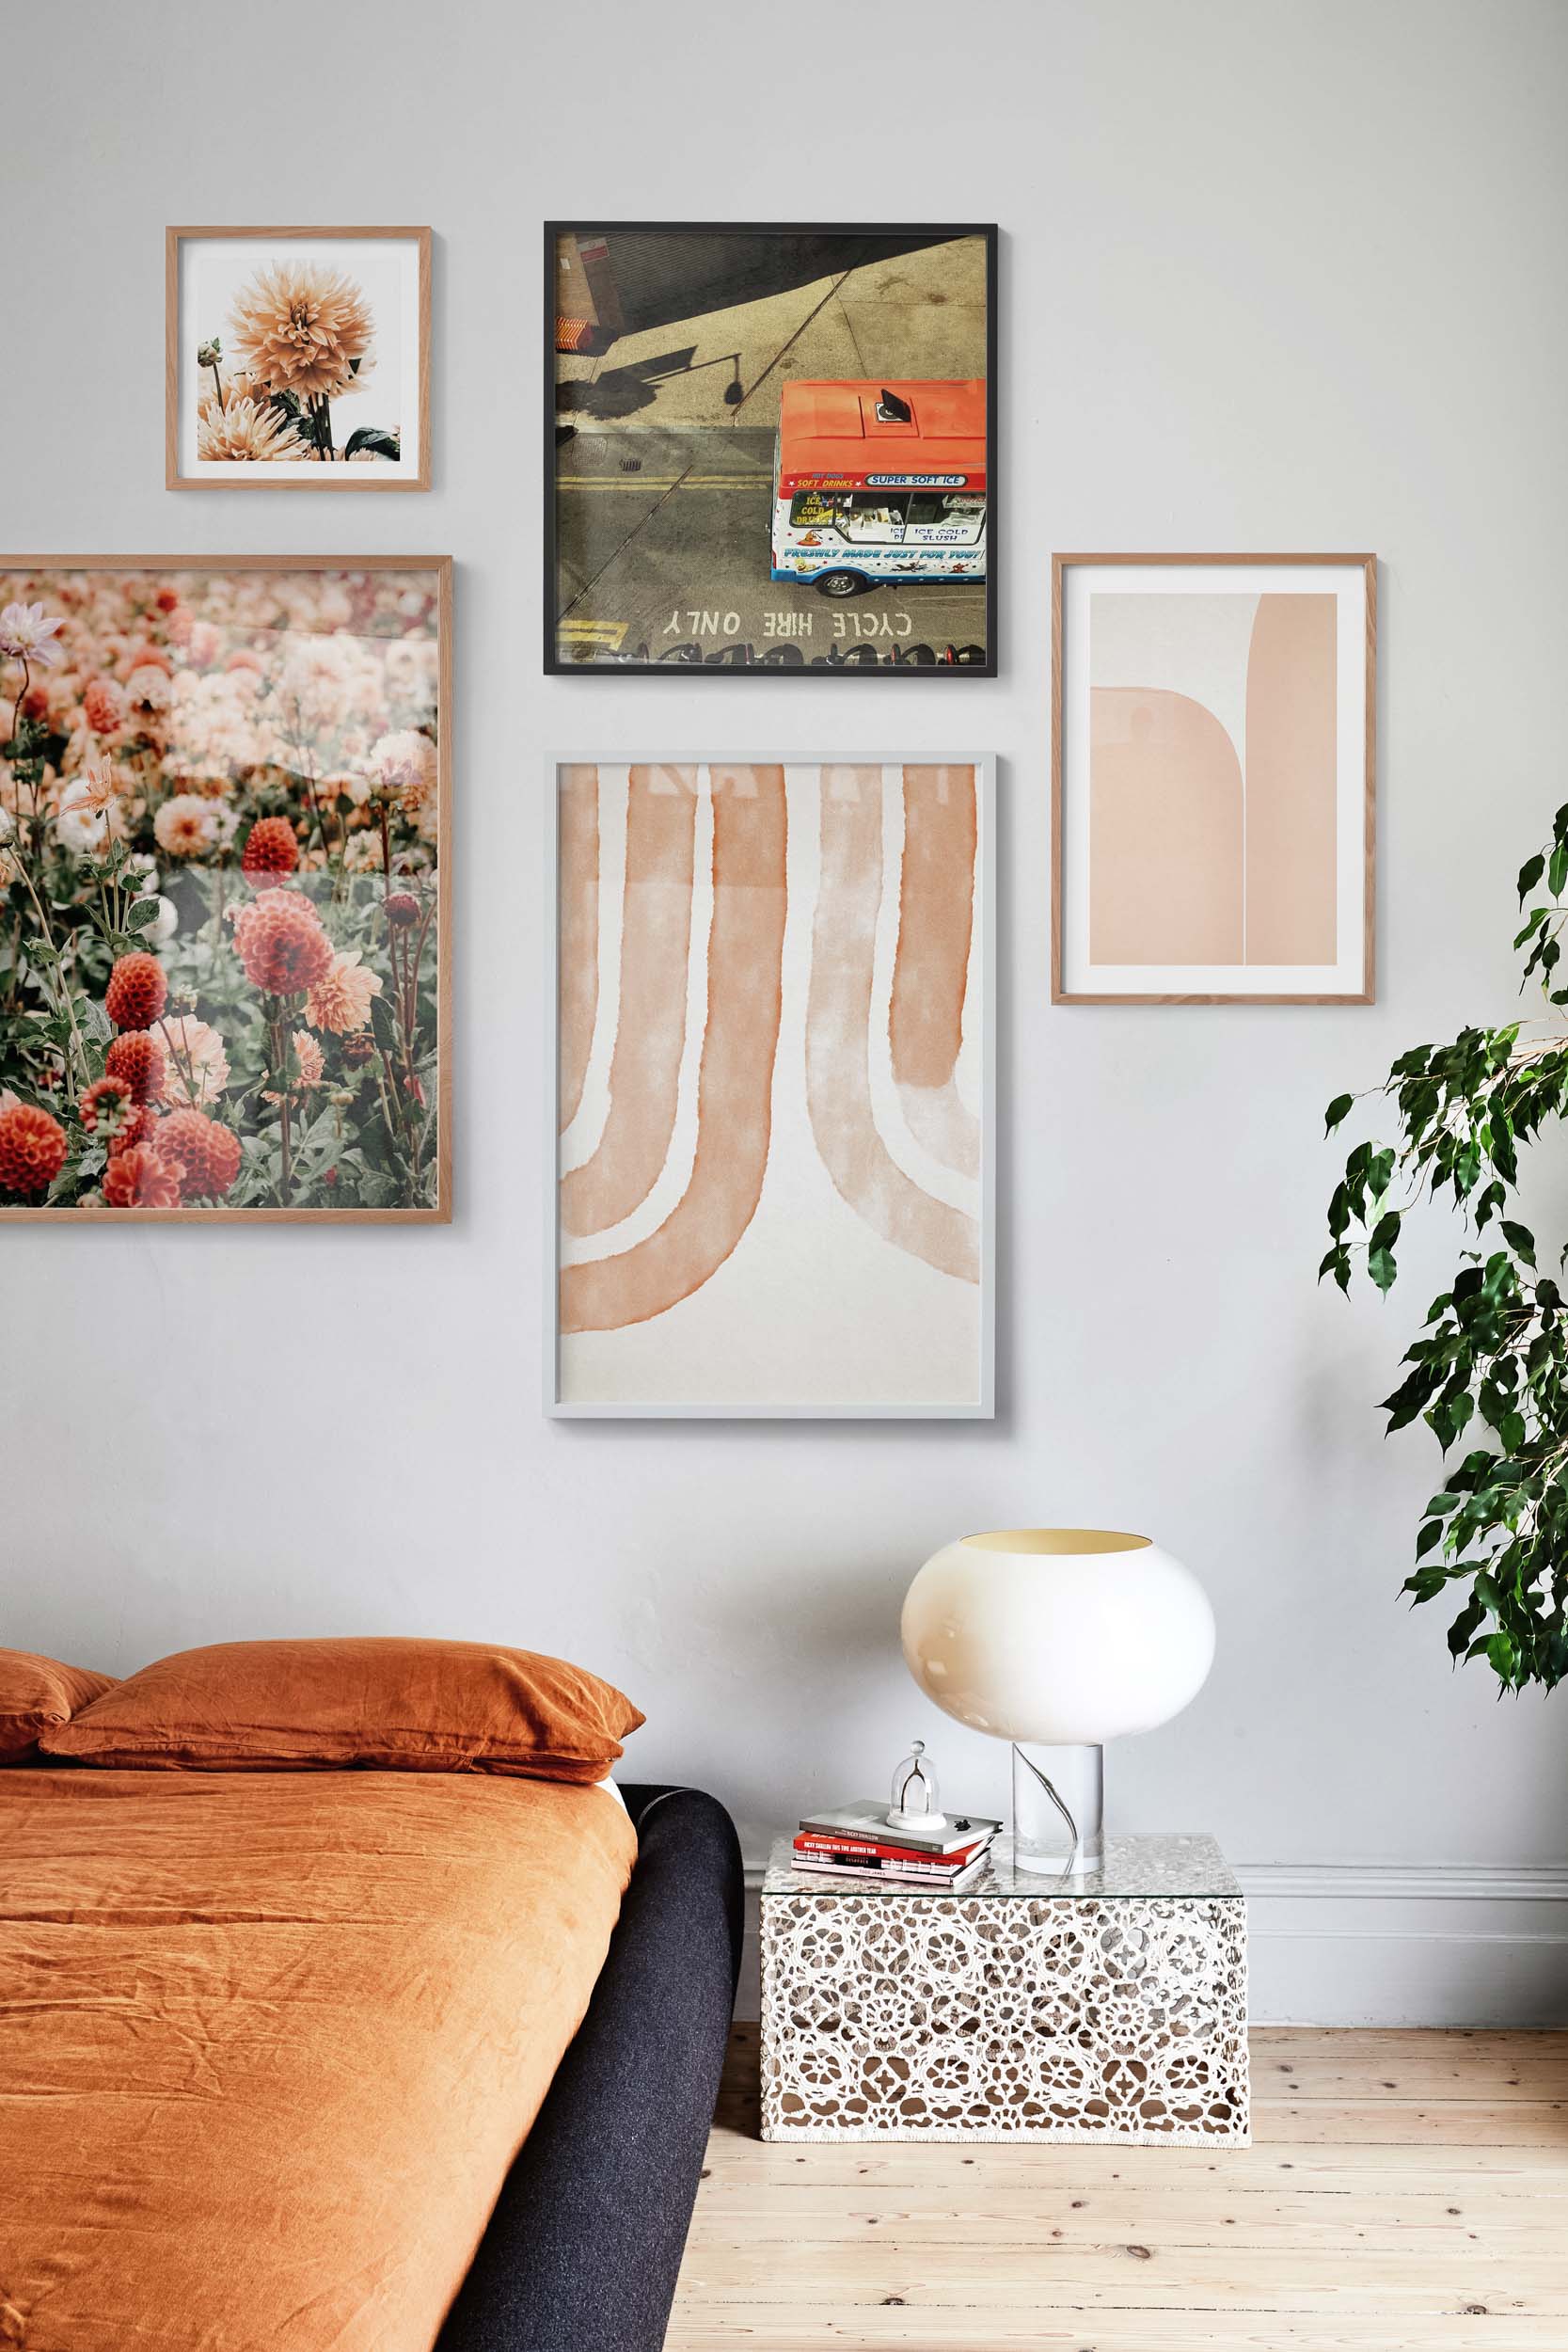 Format Framing Gallery Wall: How to Saloon Hang